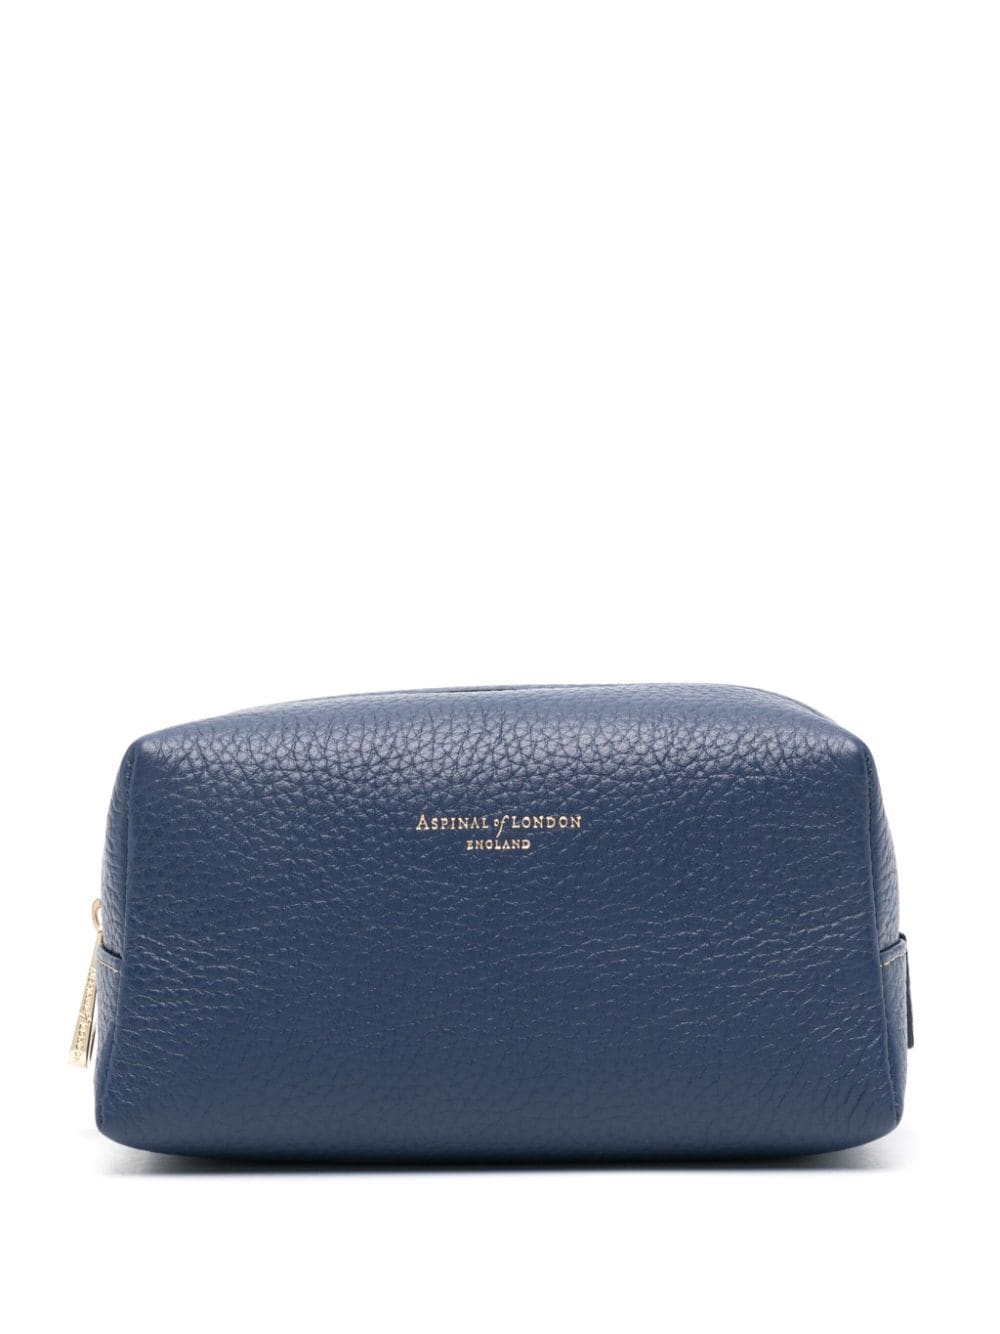 Aspinal Of London small London leather make up bag - Blue von Aspinal Of London